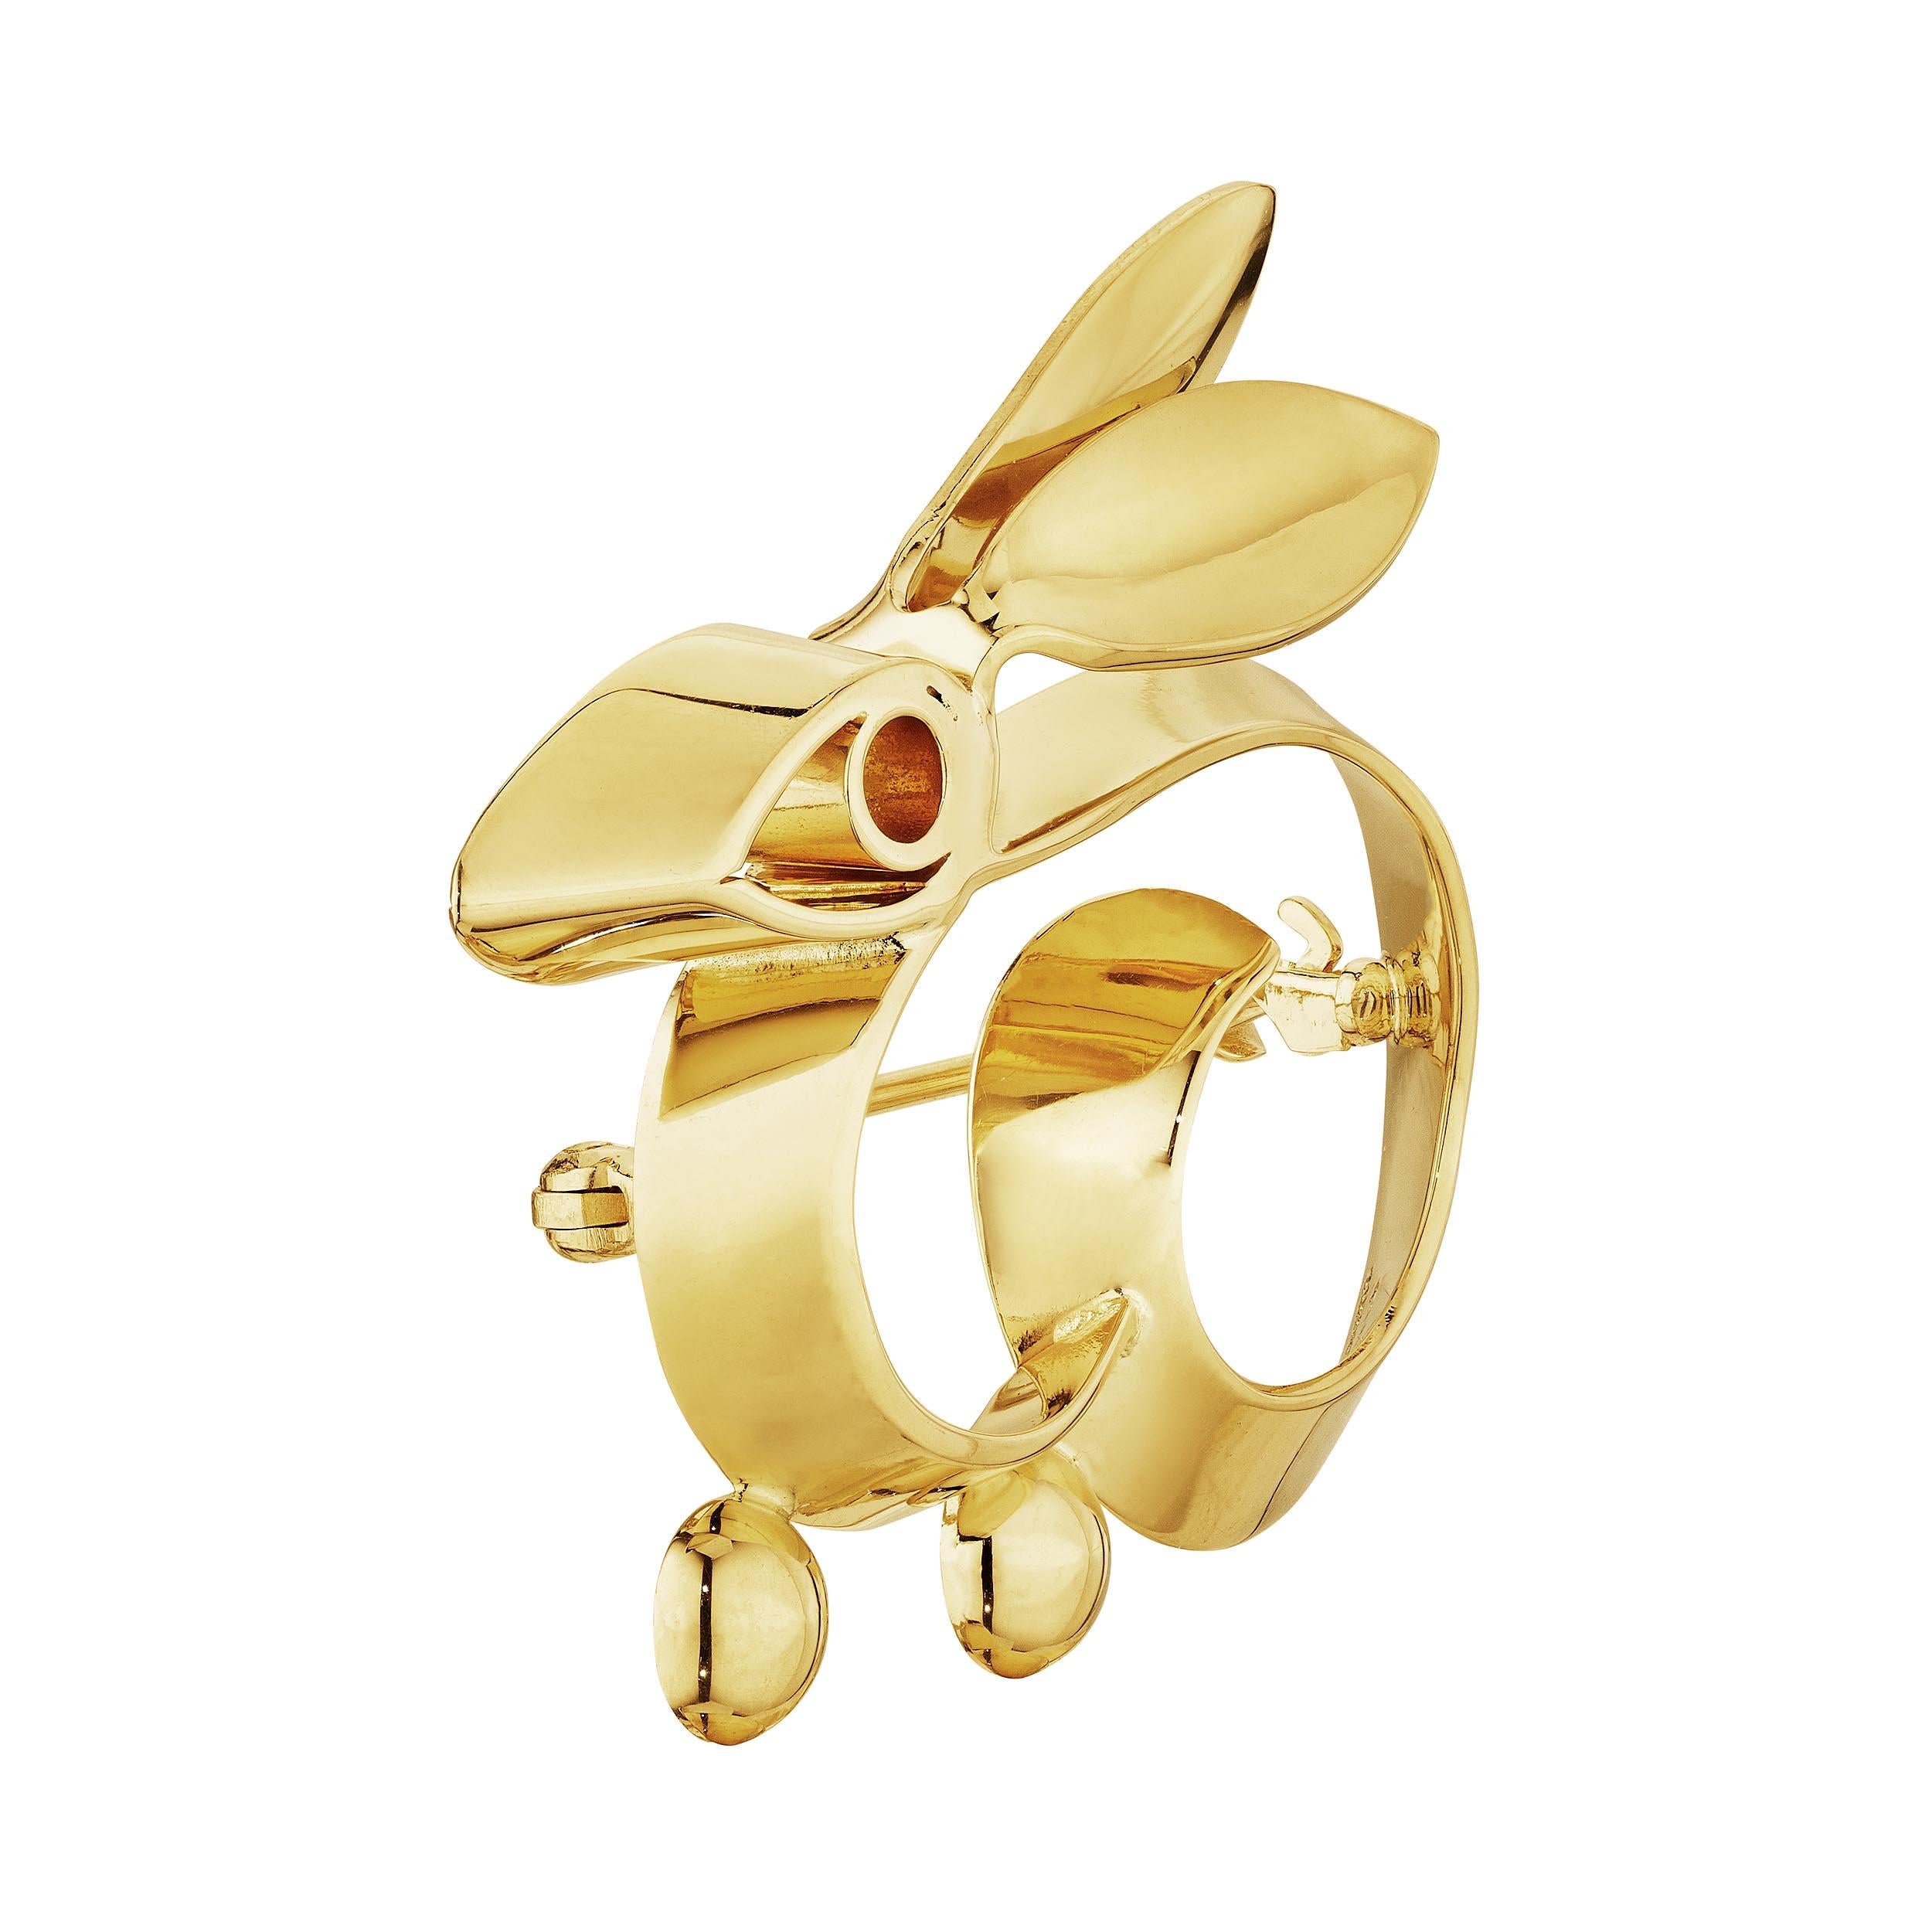 The rabbit is the symbol of longevity, peace, and prosperity in Chinese Culture and 2023, the year of the rabbit, is predicted to also be a year of hope.  When wearing this Tiffany & Co. mid-century 14 karat yellow gold rabbit brooch, may you